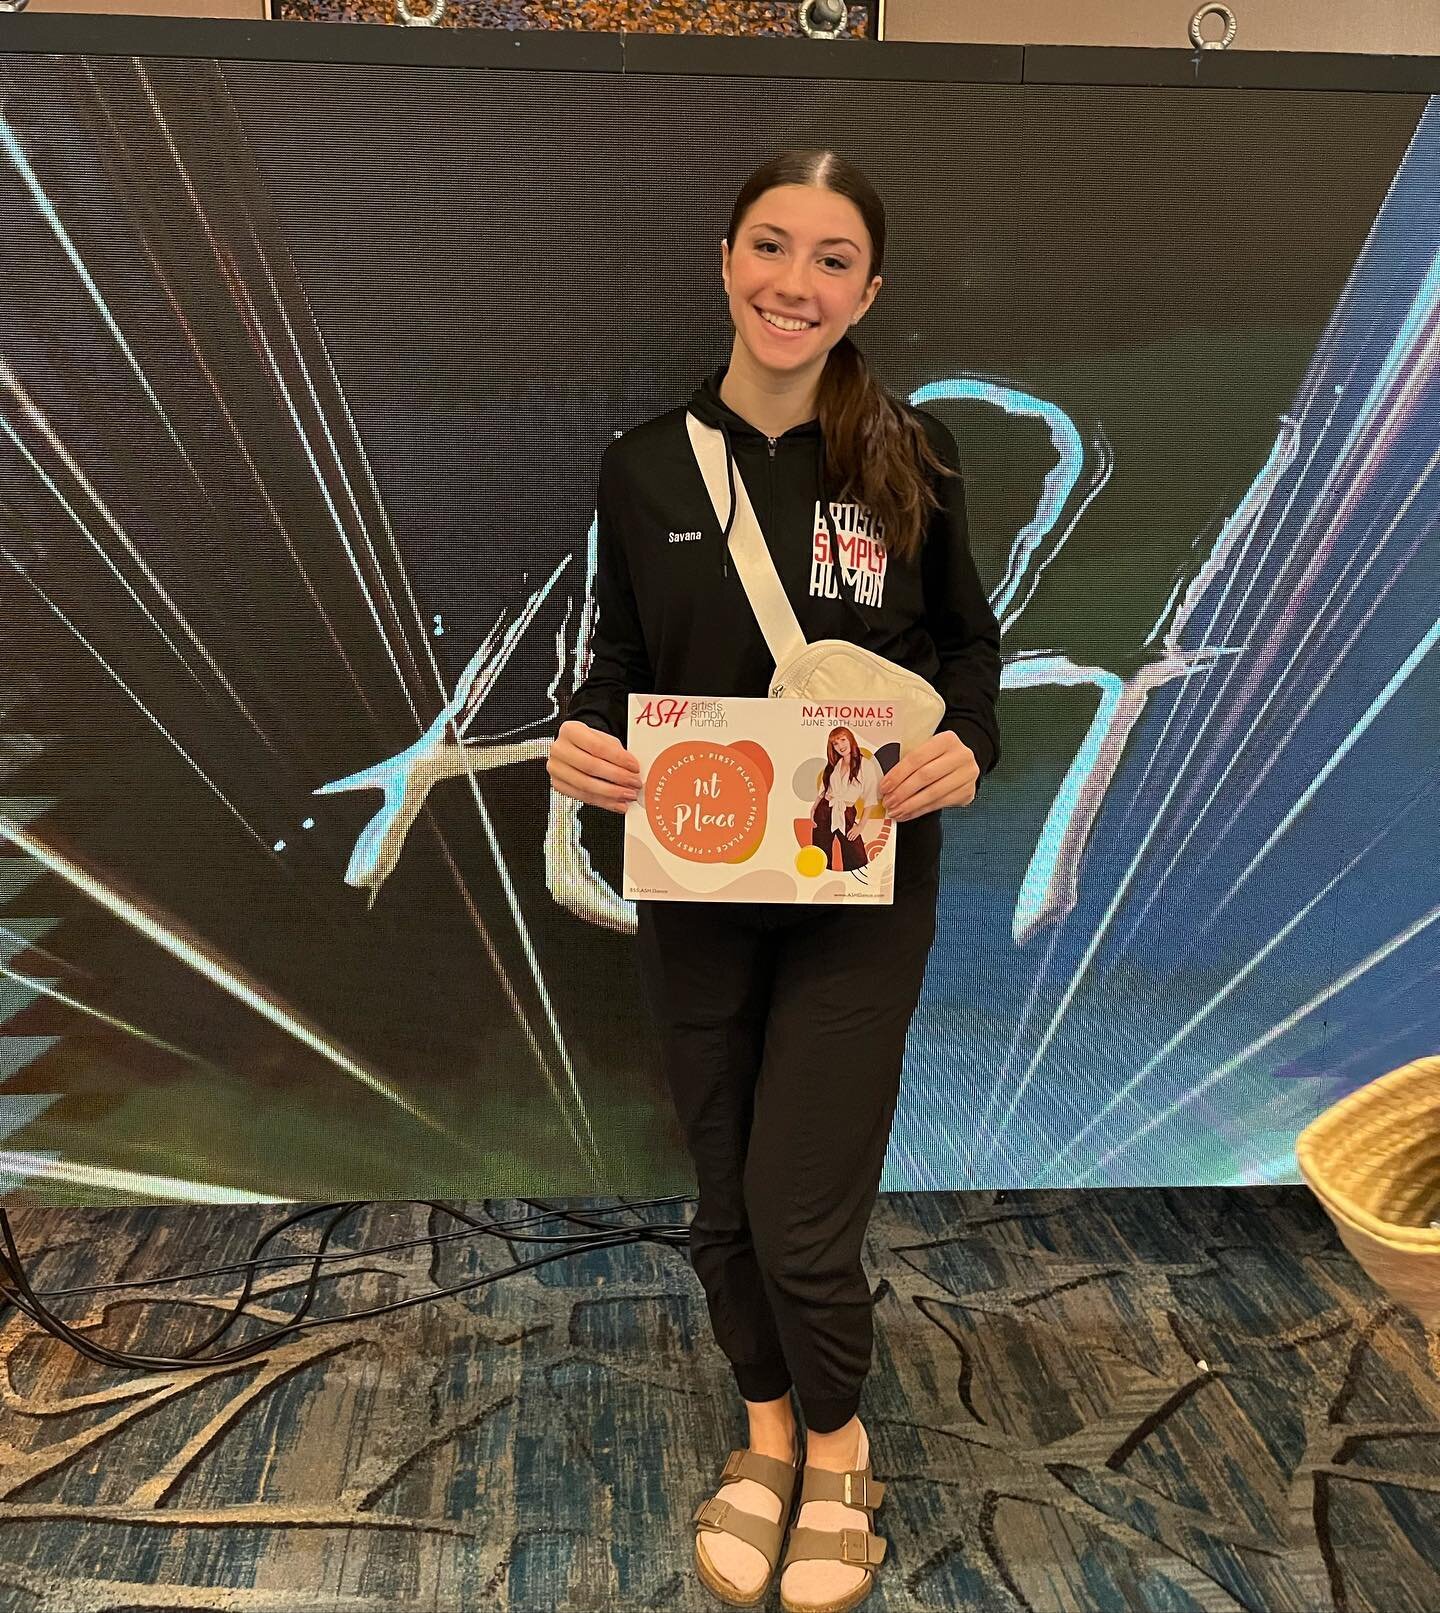 Congratulations to Savana Brochu-Martino who attended ASH Nationals in Orlando this week! She took several classes with amazing faculty, learned and performed a group piece, and performed her solo receiving a 1st place score, topping it off with many